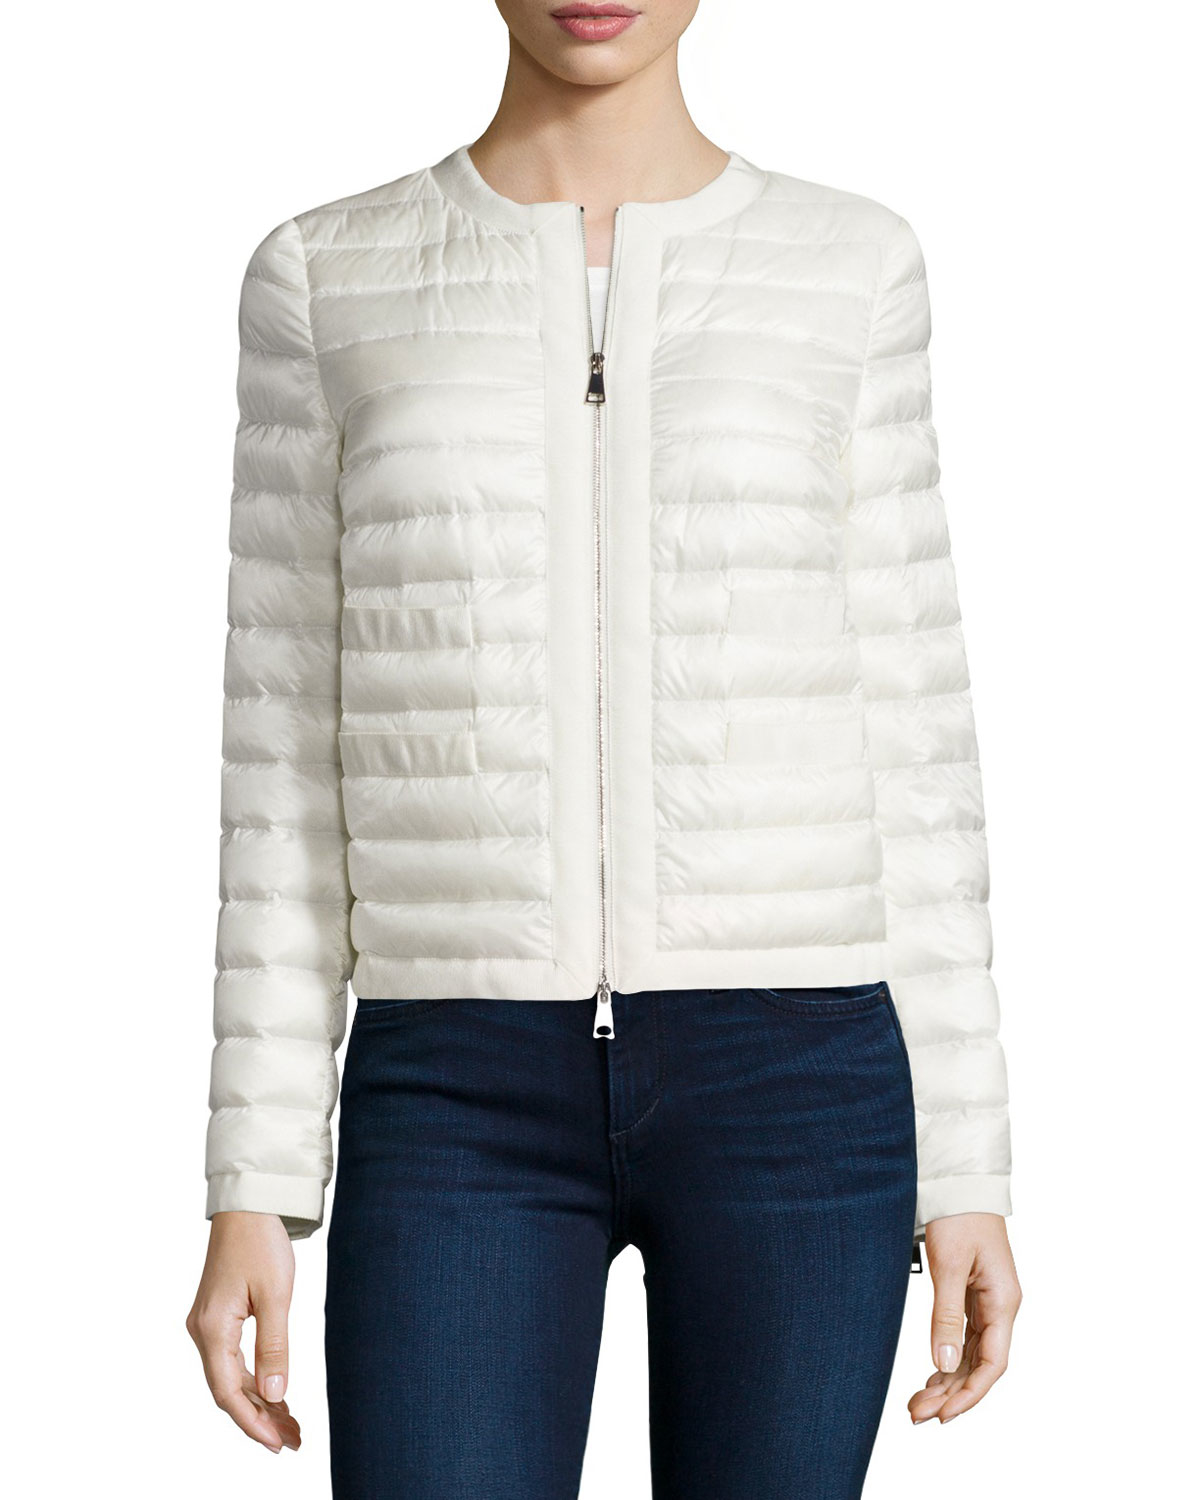 Lyst - Moncler Collarless Quilted Jacket in Natural